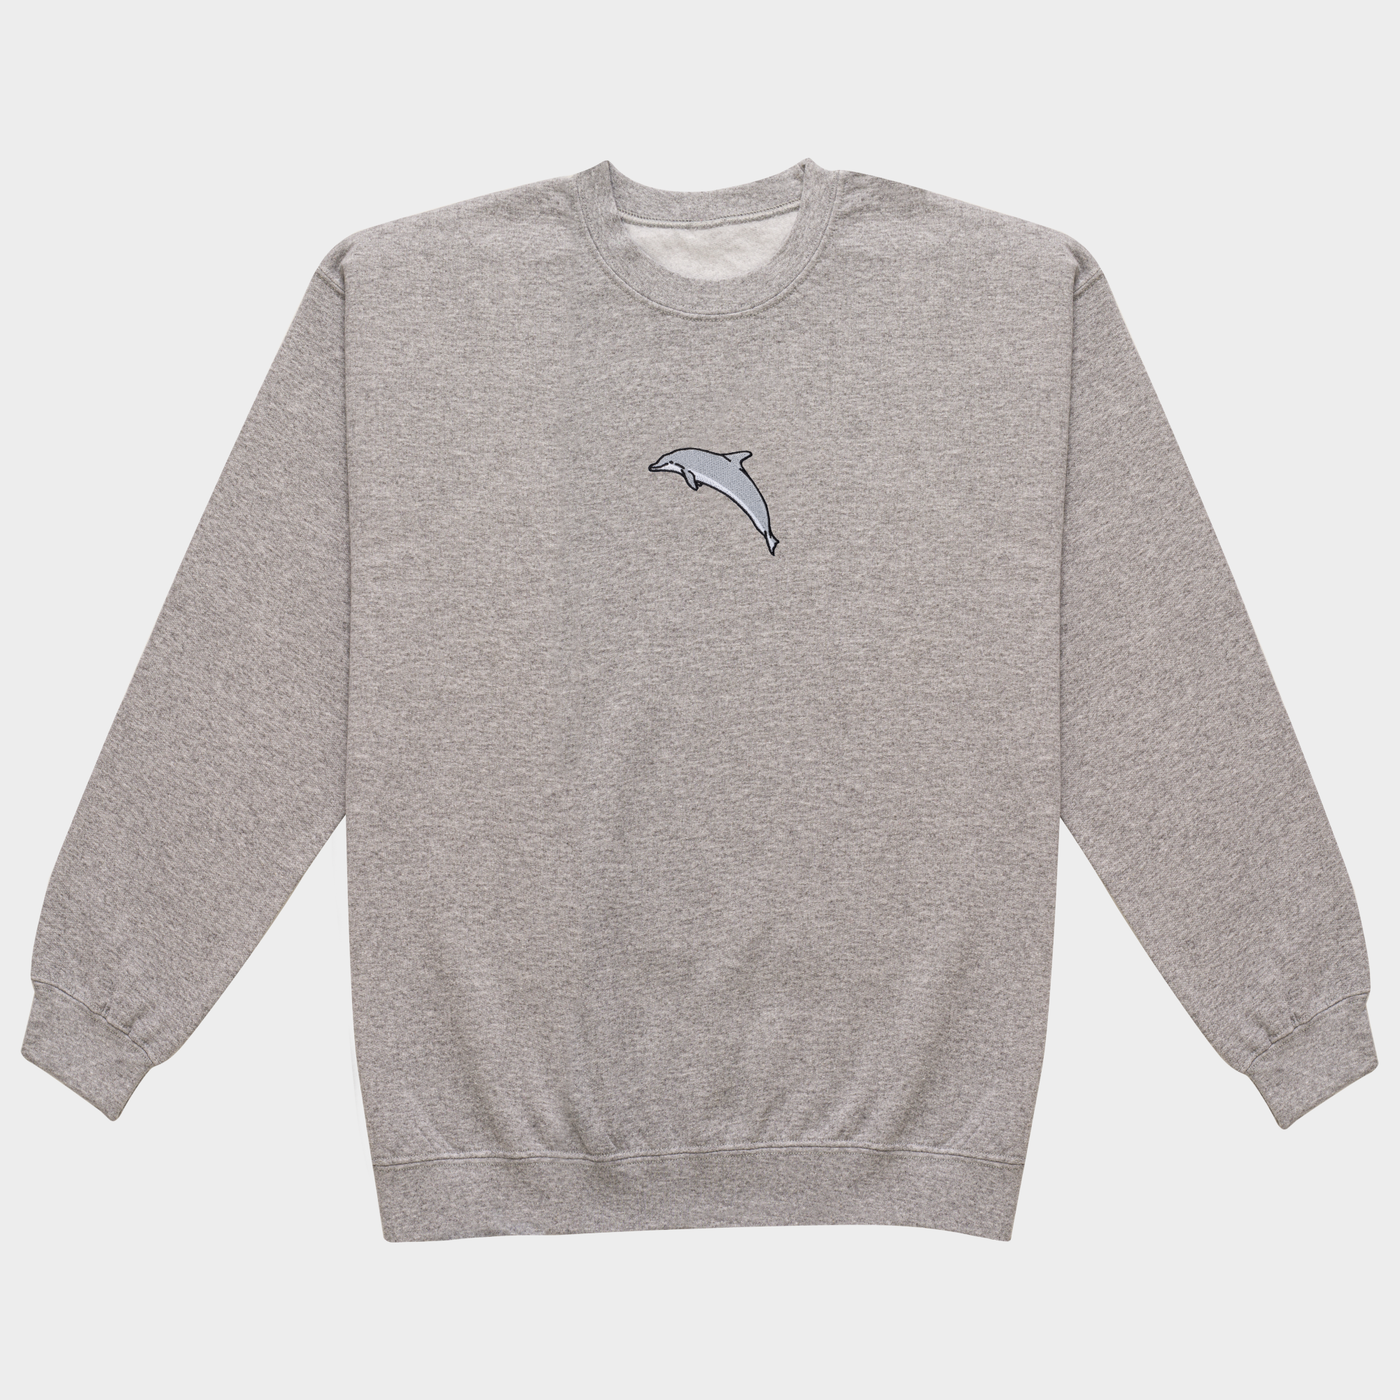 Bobby's Planet Women's Embroidered Dolphin Sweatshirt from Seven Seas Fish Animals Collection in Sport Grey Color#color_sport-grey